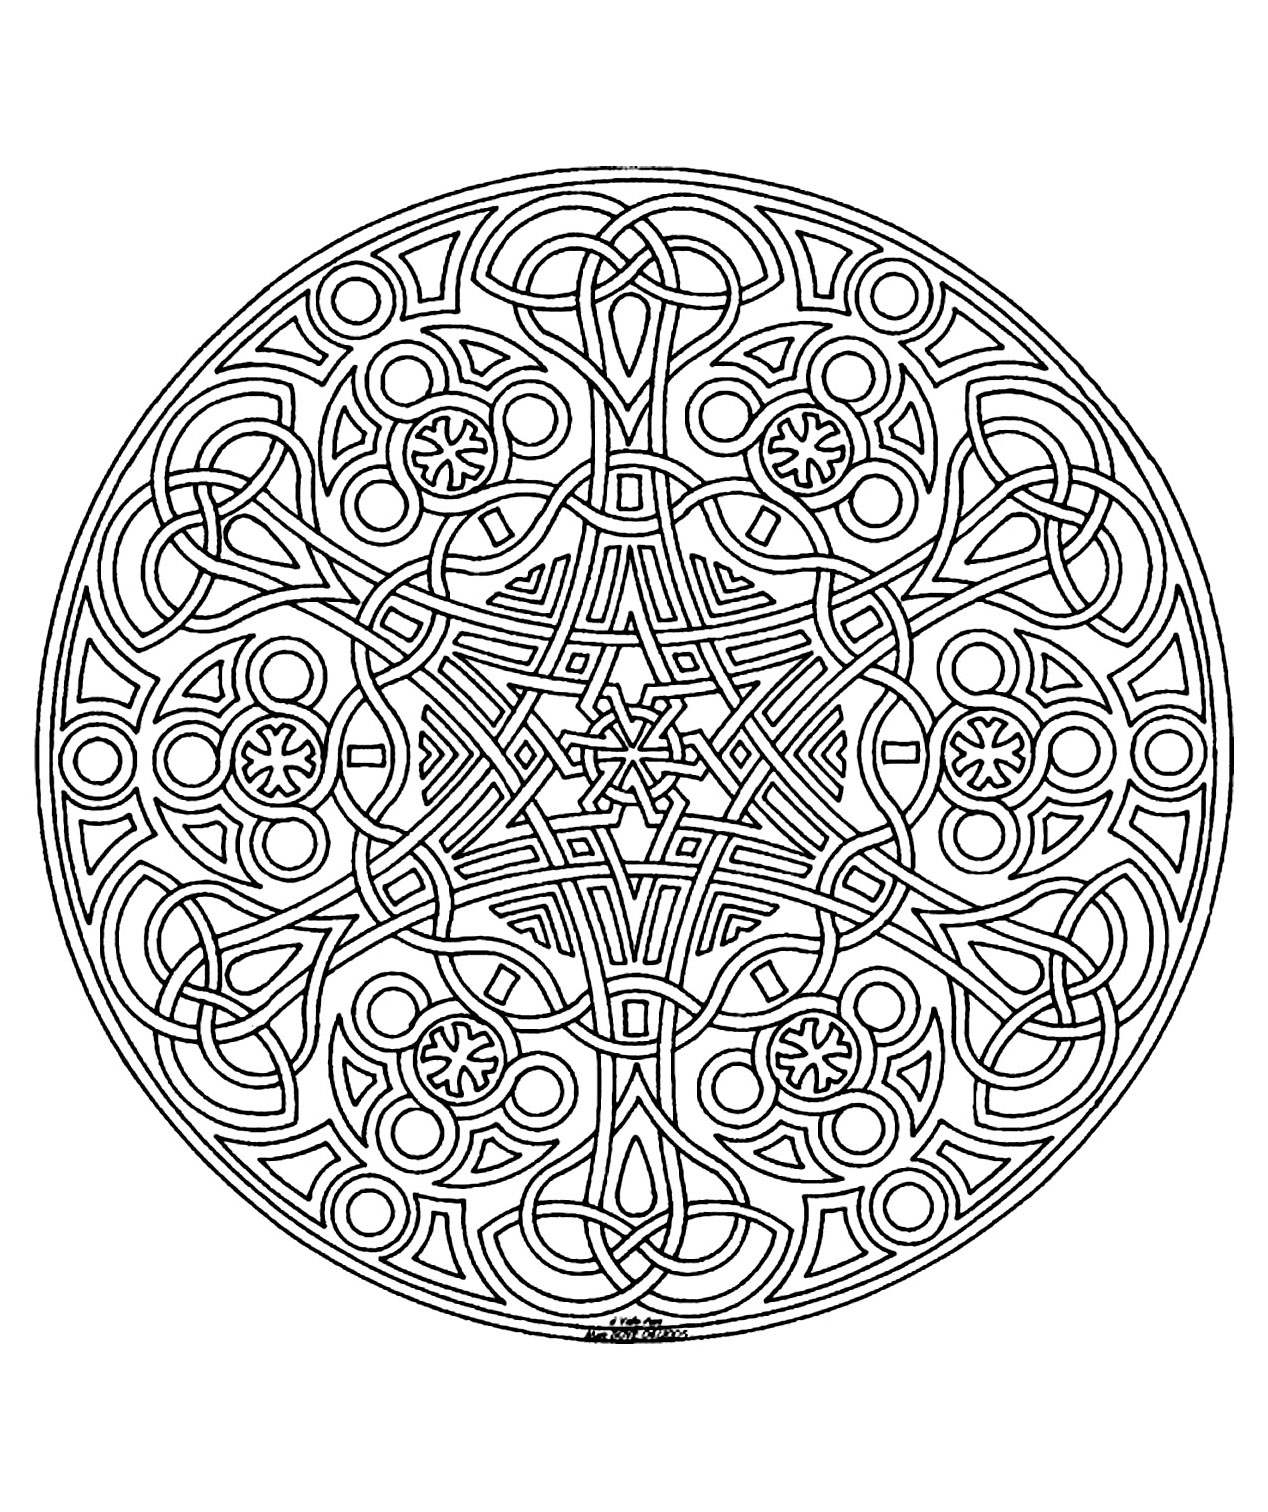 Mandala to color zen relax free - 7